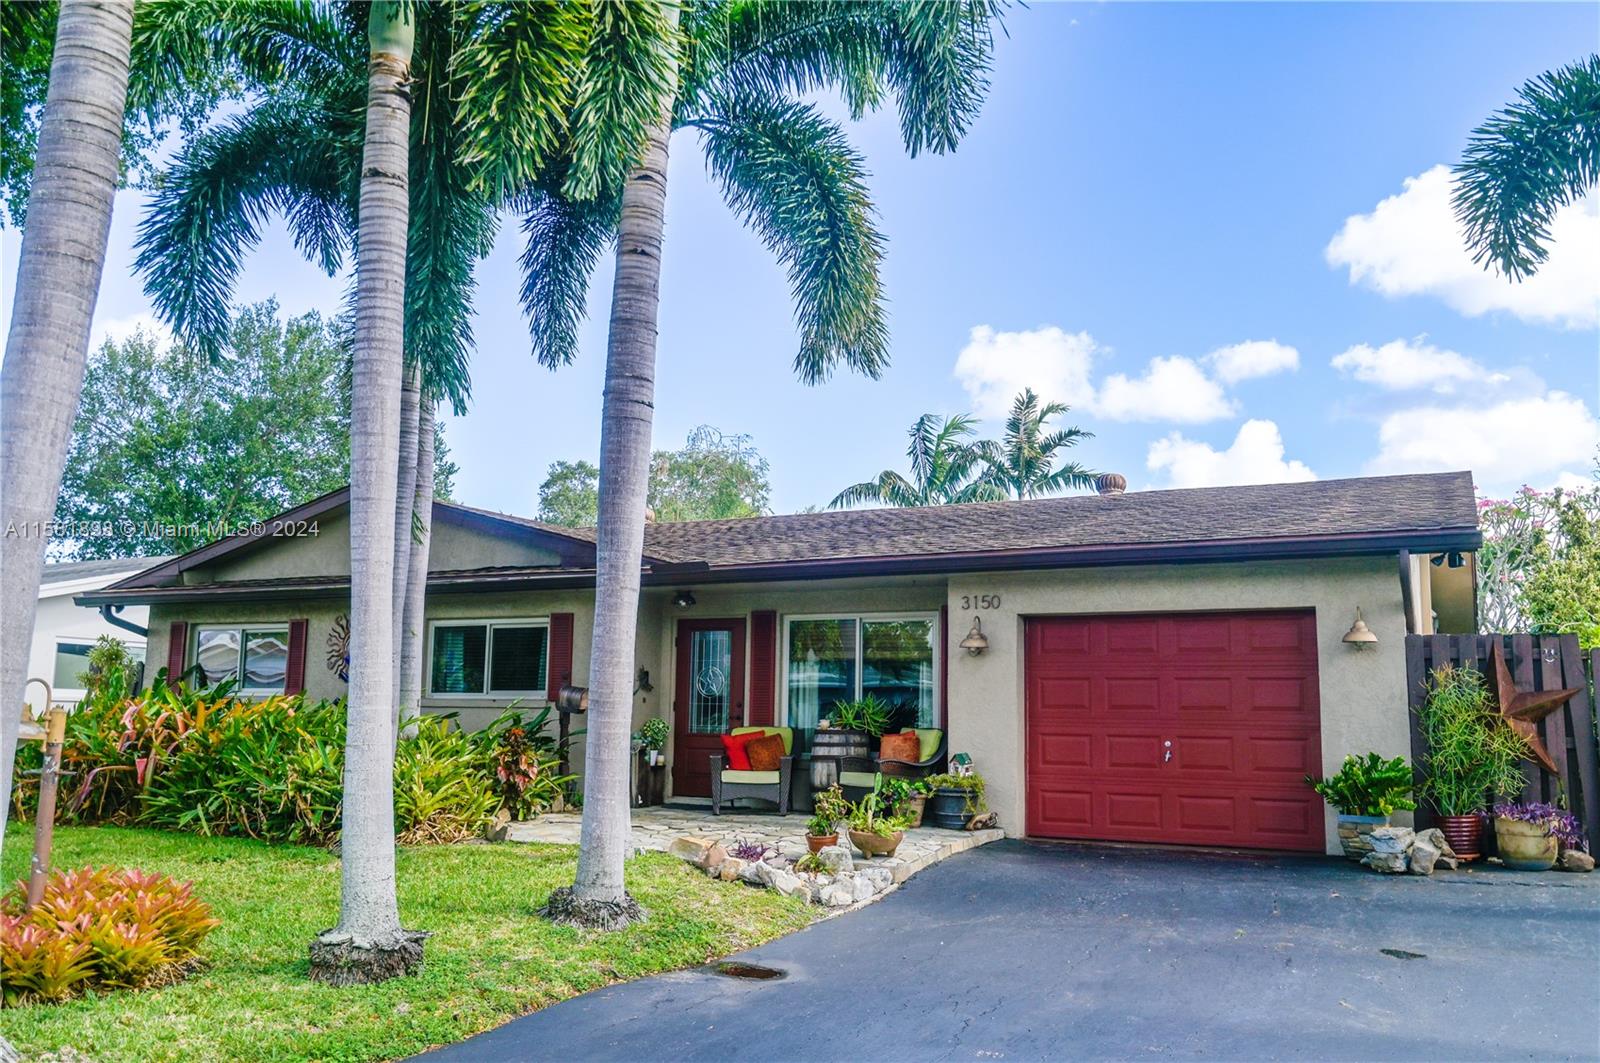 3150 Nw 69th St St, Fort Lauderdale, Broward County, Florida - 4 Bedrooms  
2 Bathrooms - 